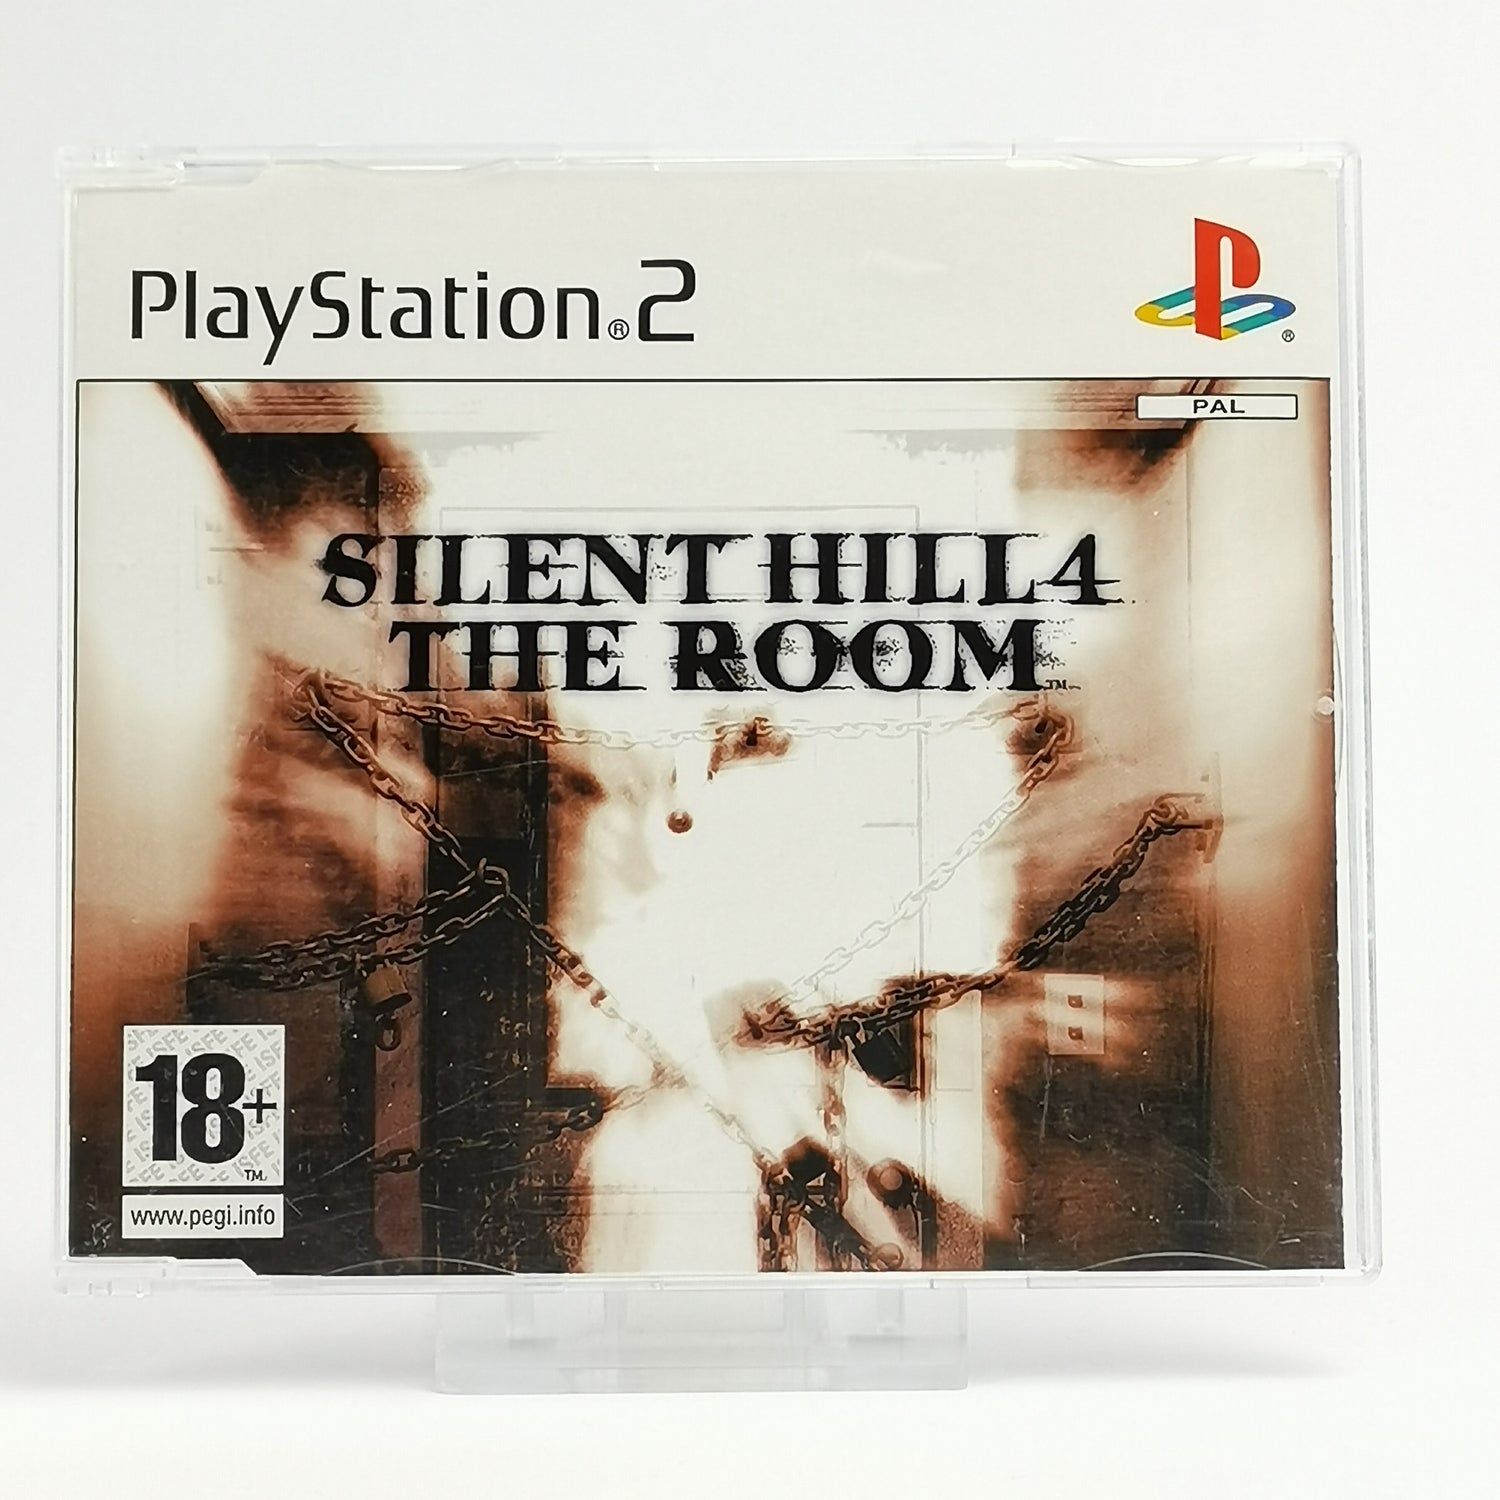 Sony Playstation 2 Promo Game: Silent Hill 4 The Room - USK18 | PS2 OVP PAL